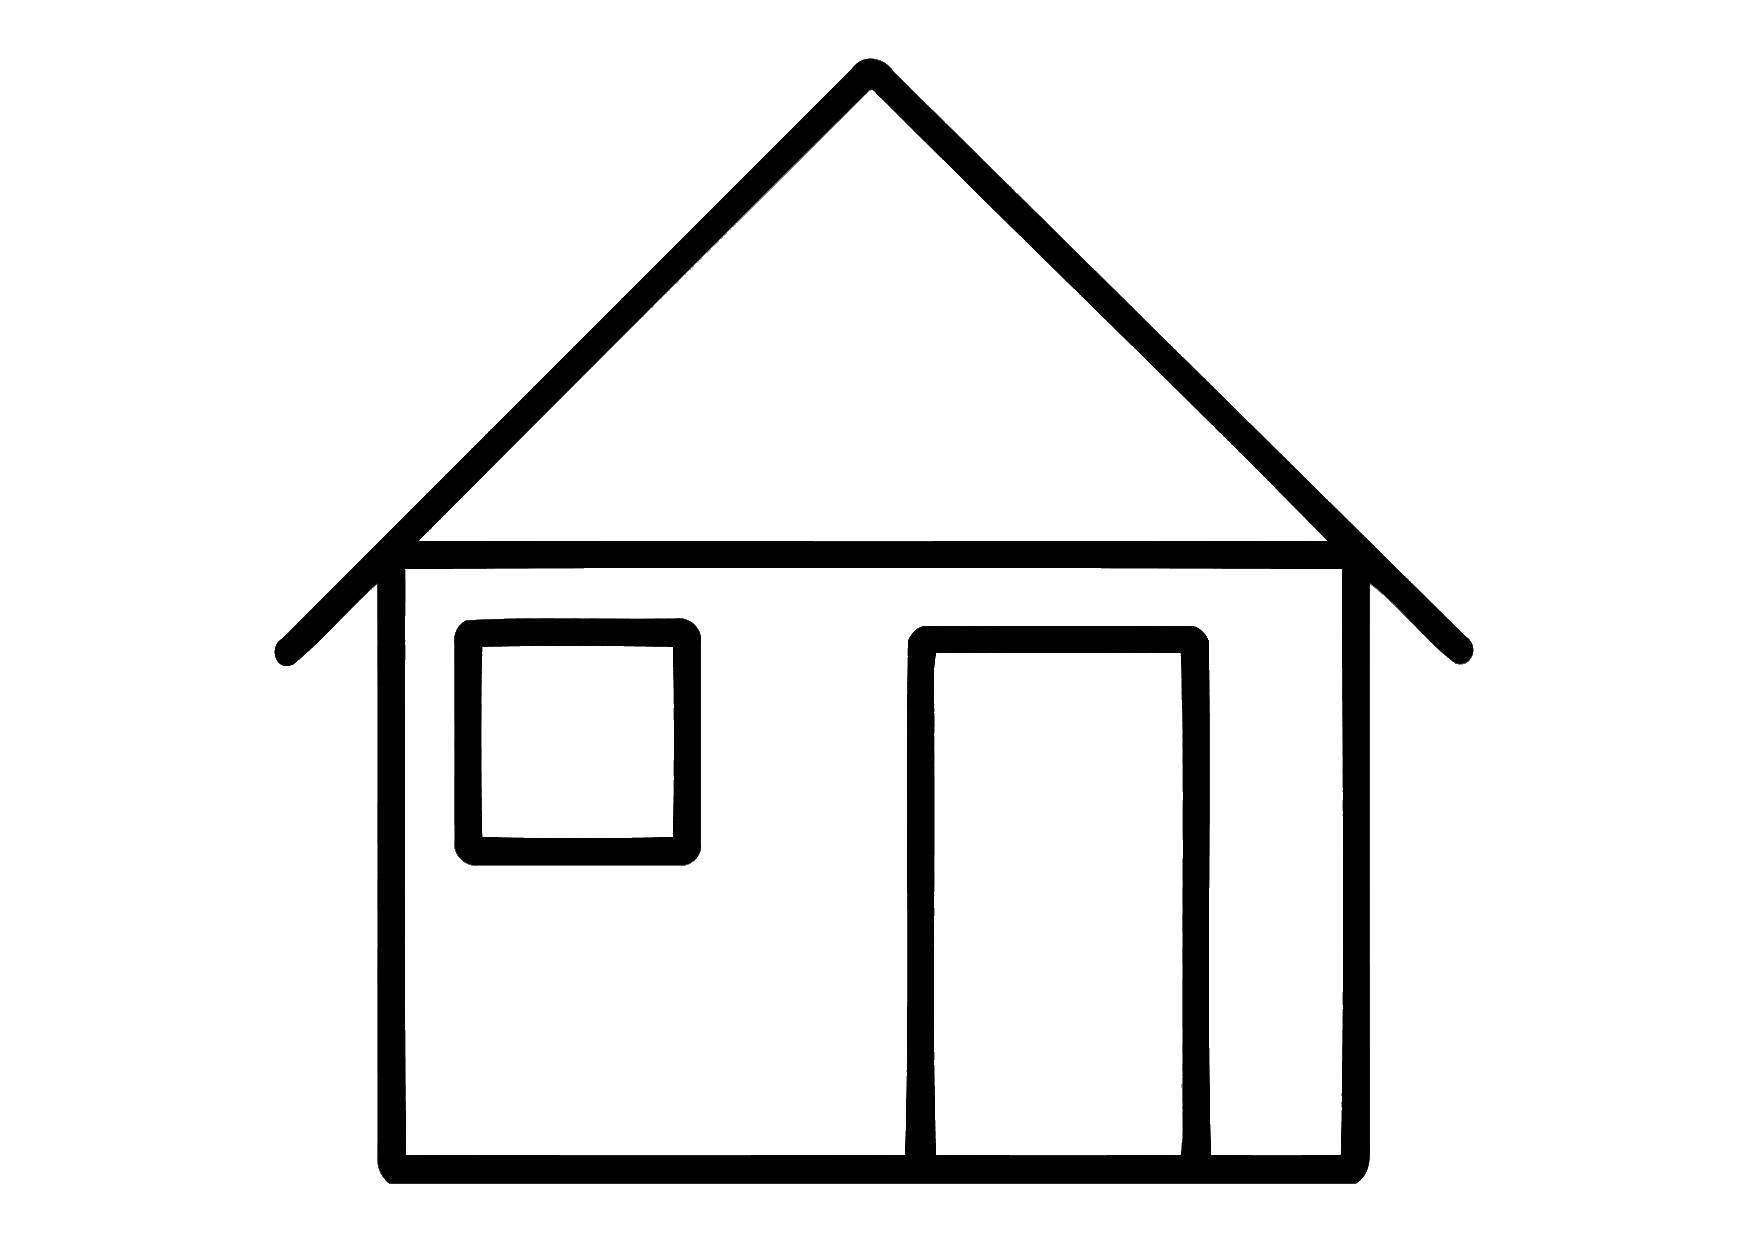 Coloring House. Category Coloring house. Tags:  house, simple house.